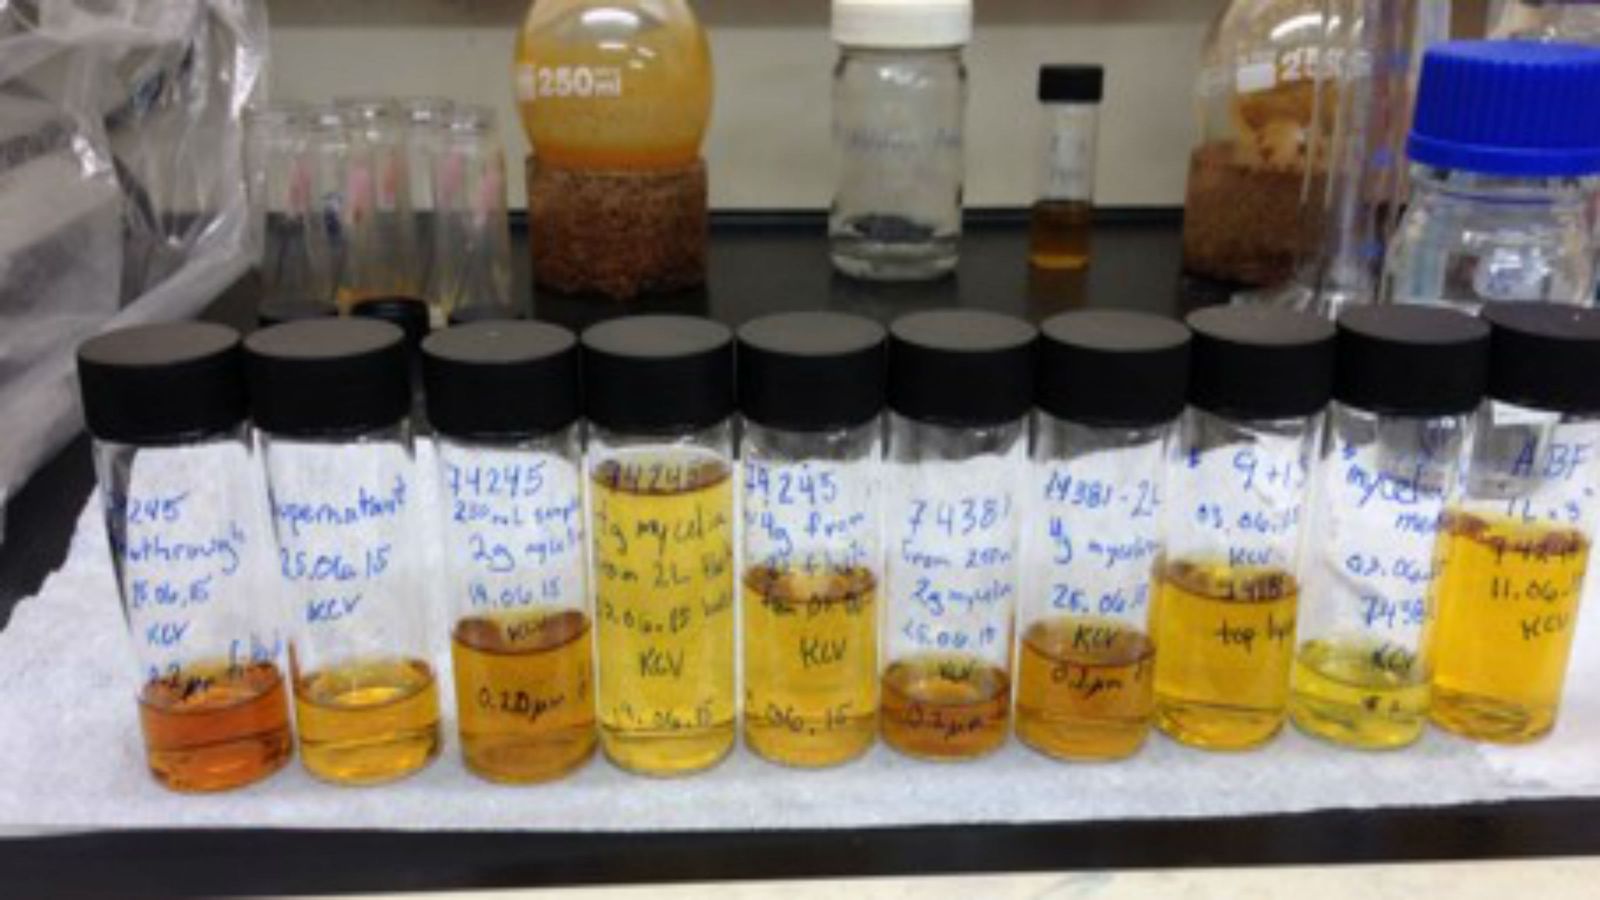 Crude fungal extracts, prepared to be analysed for bioactivity.